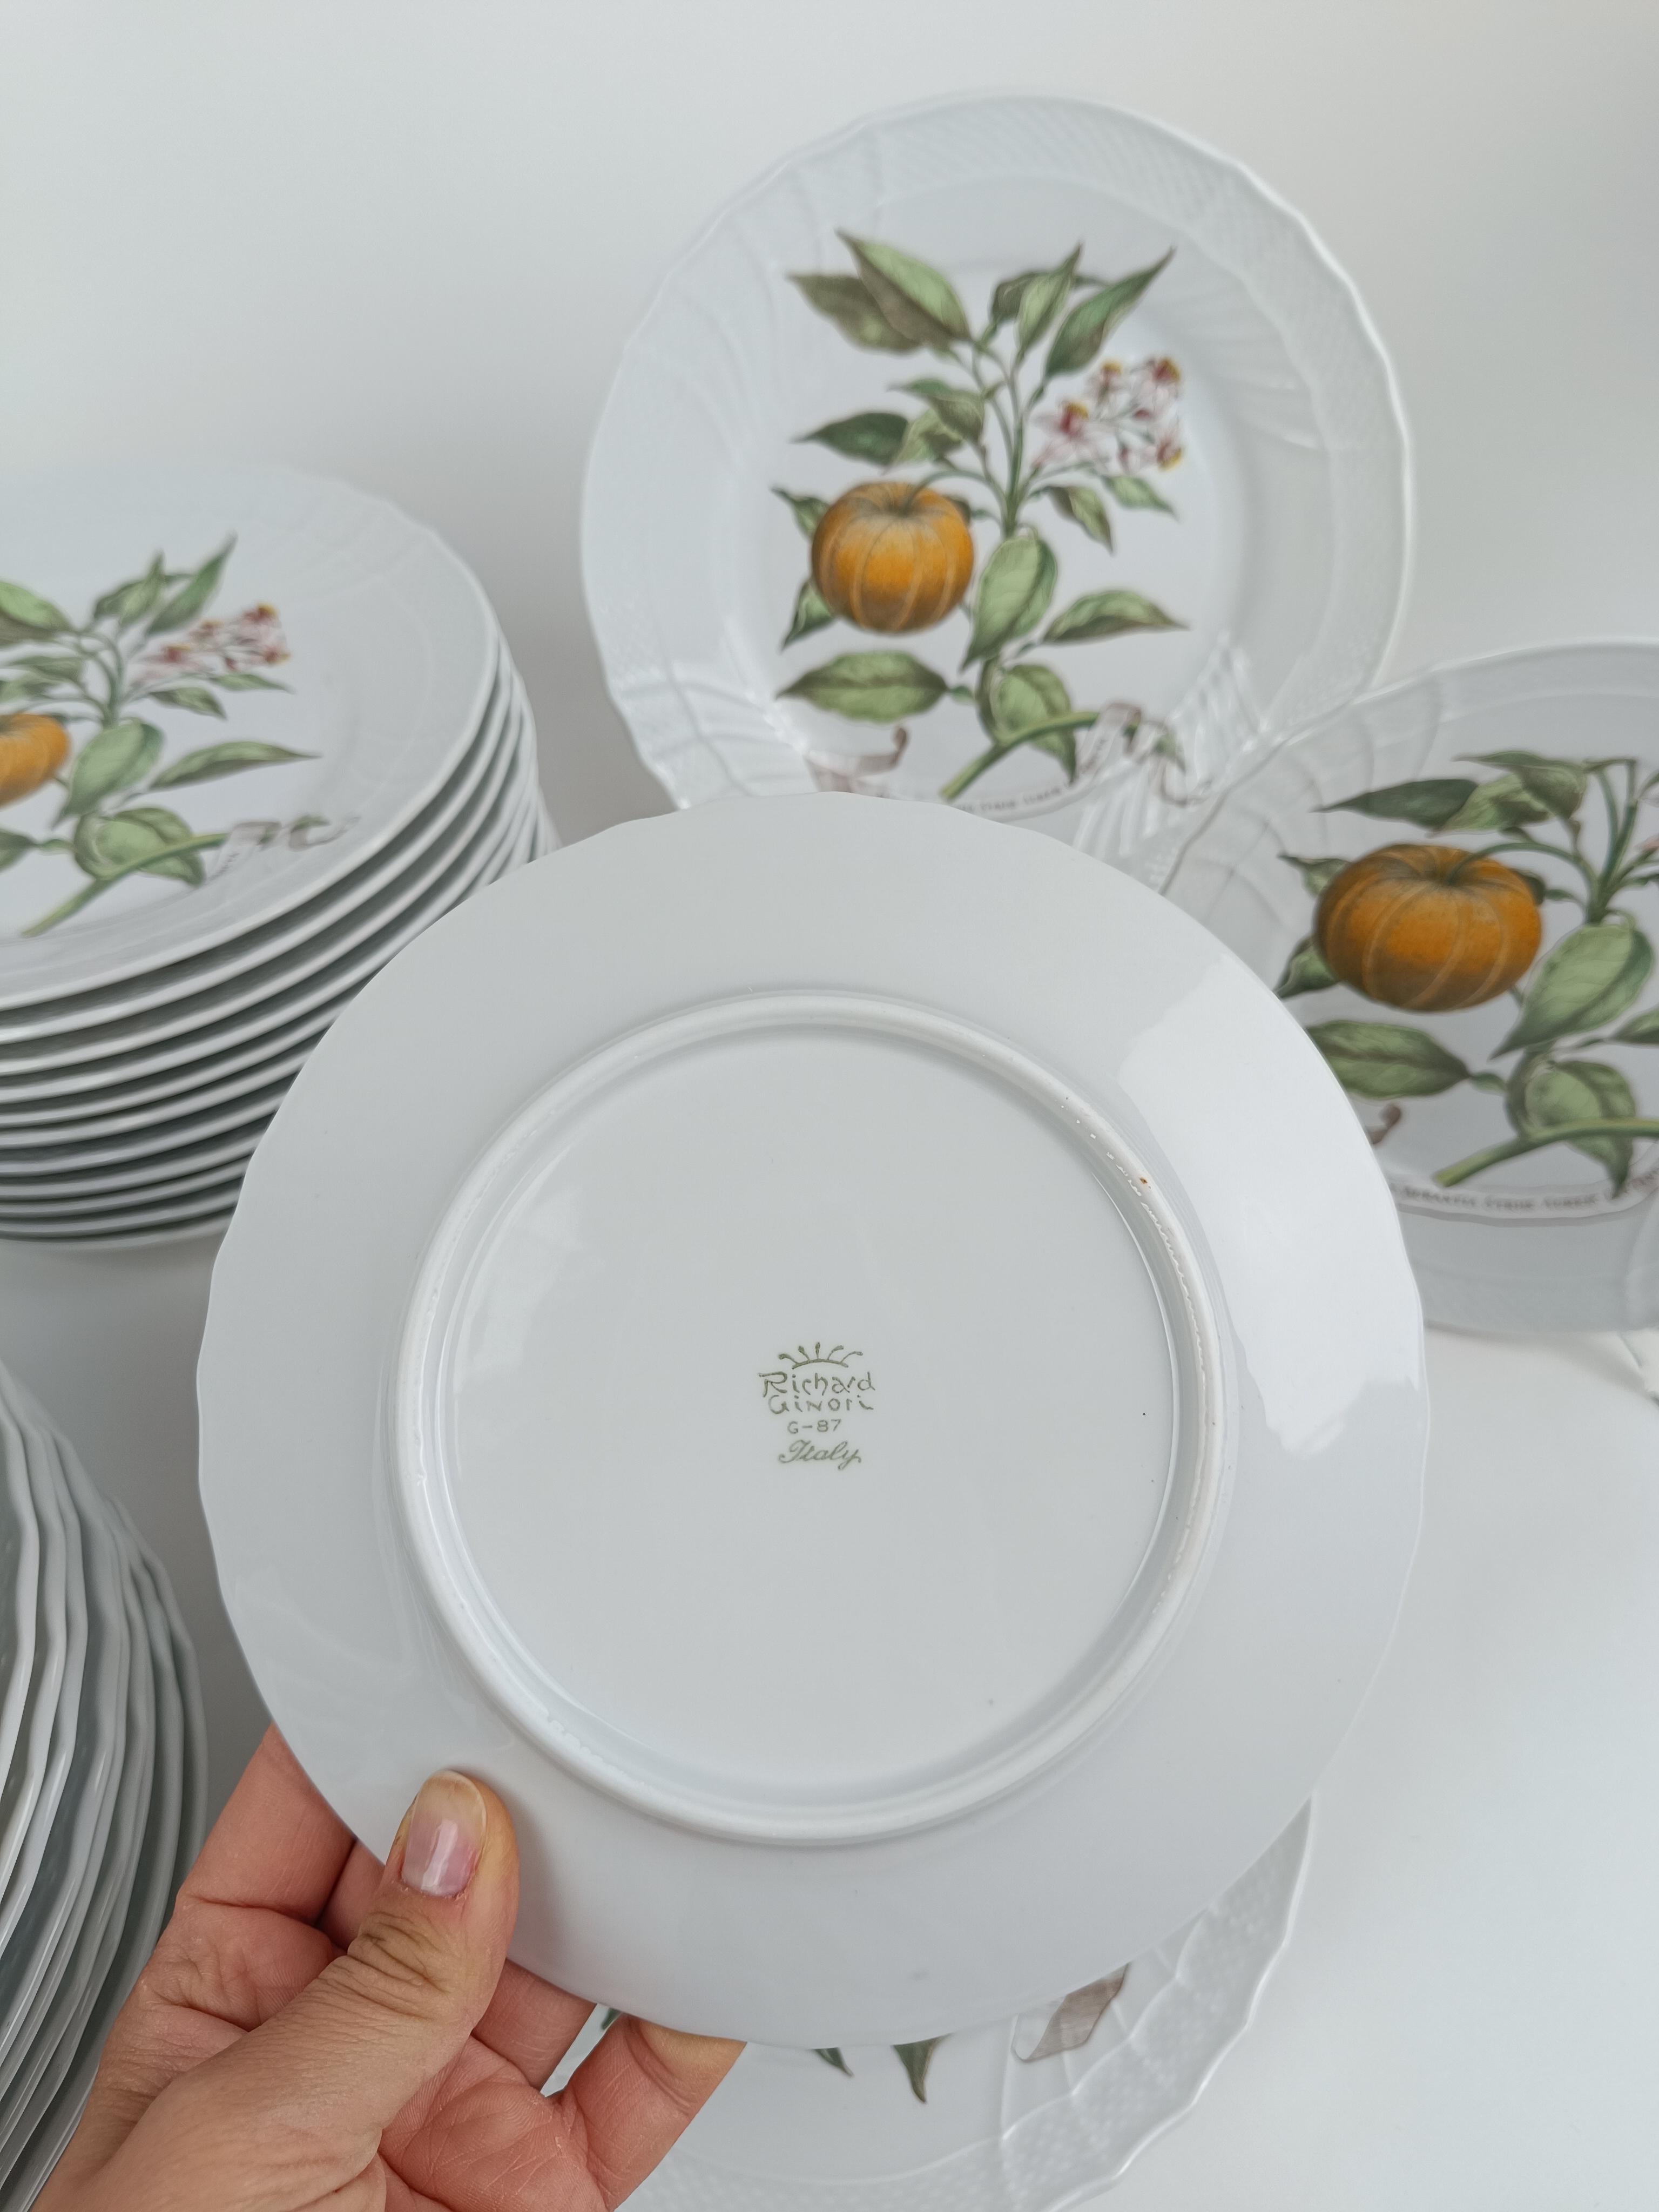 Richard Ginori China Dinner Service with a botanical print by Munting Abraham For Sale 5